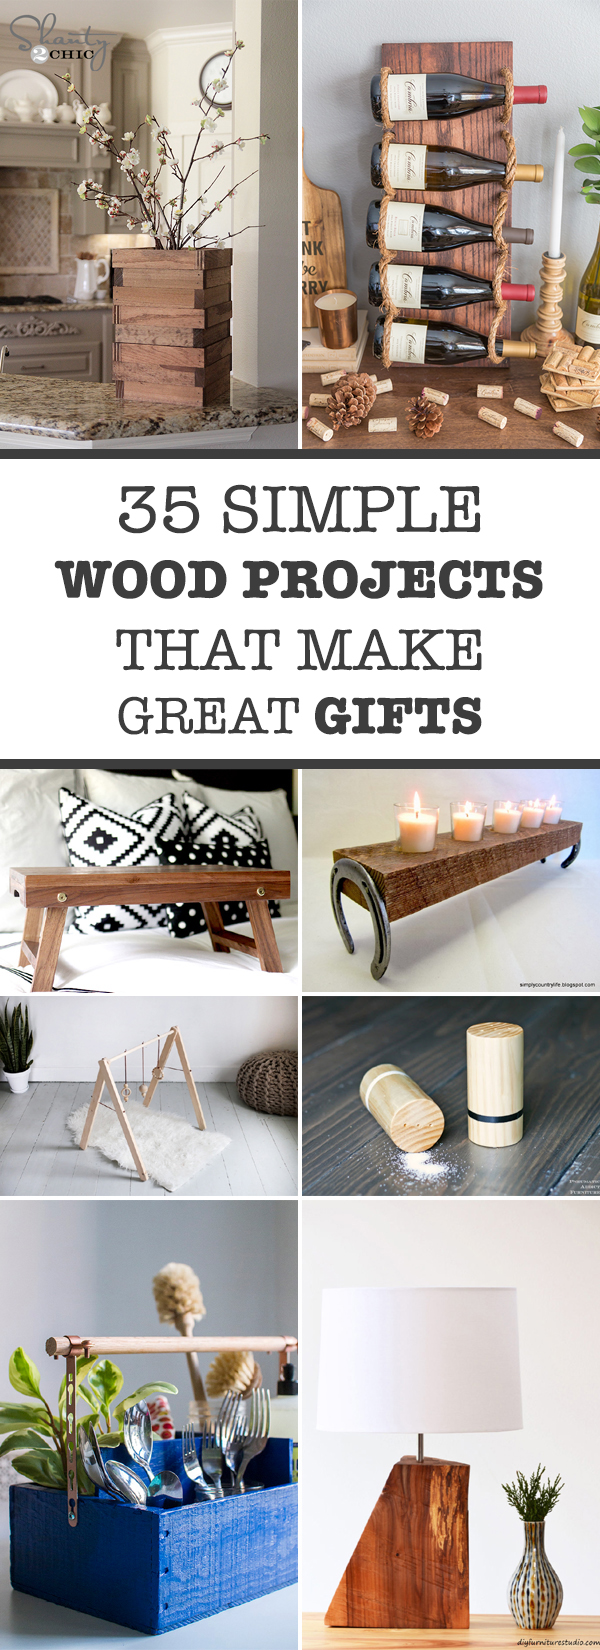 35 Simple Wood Projects That Make Great Gifts